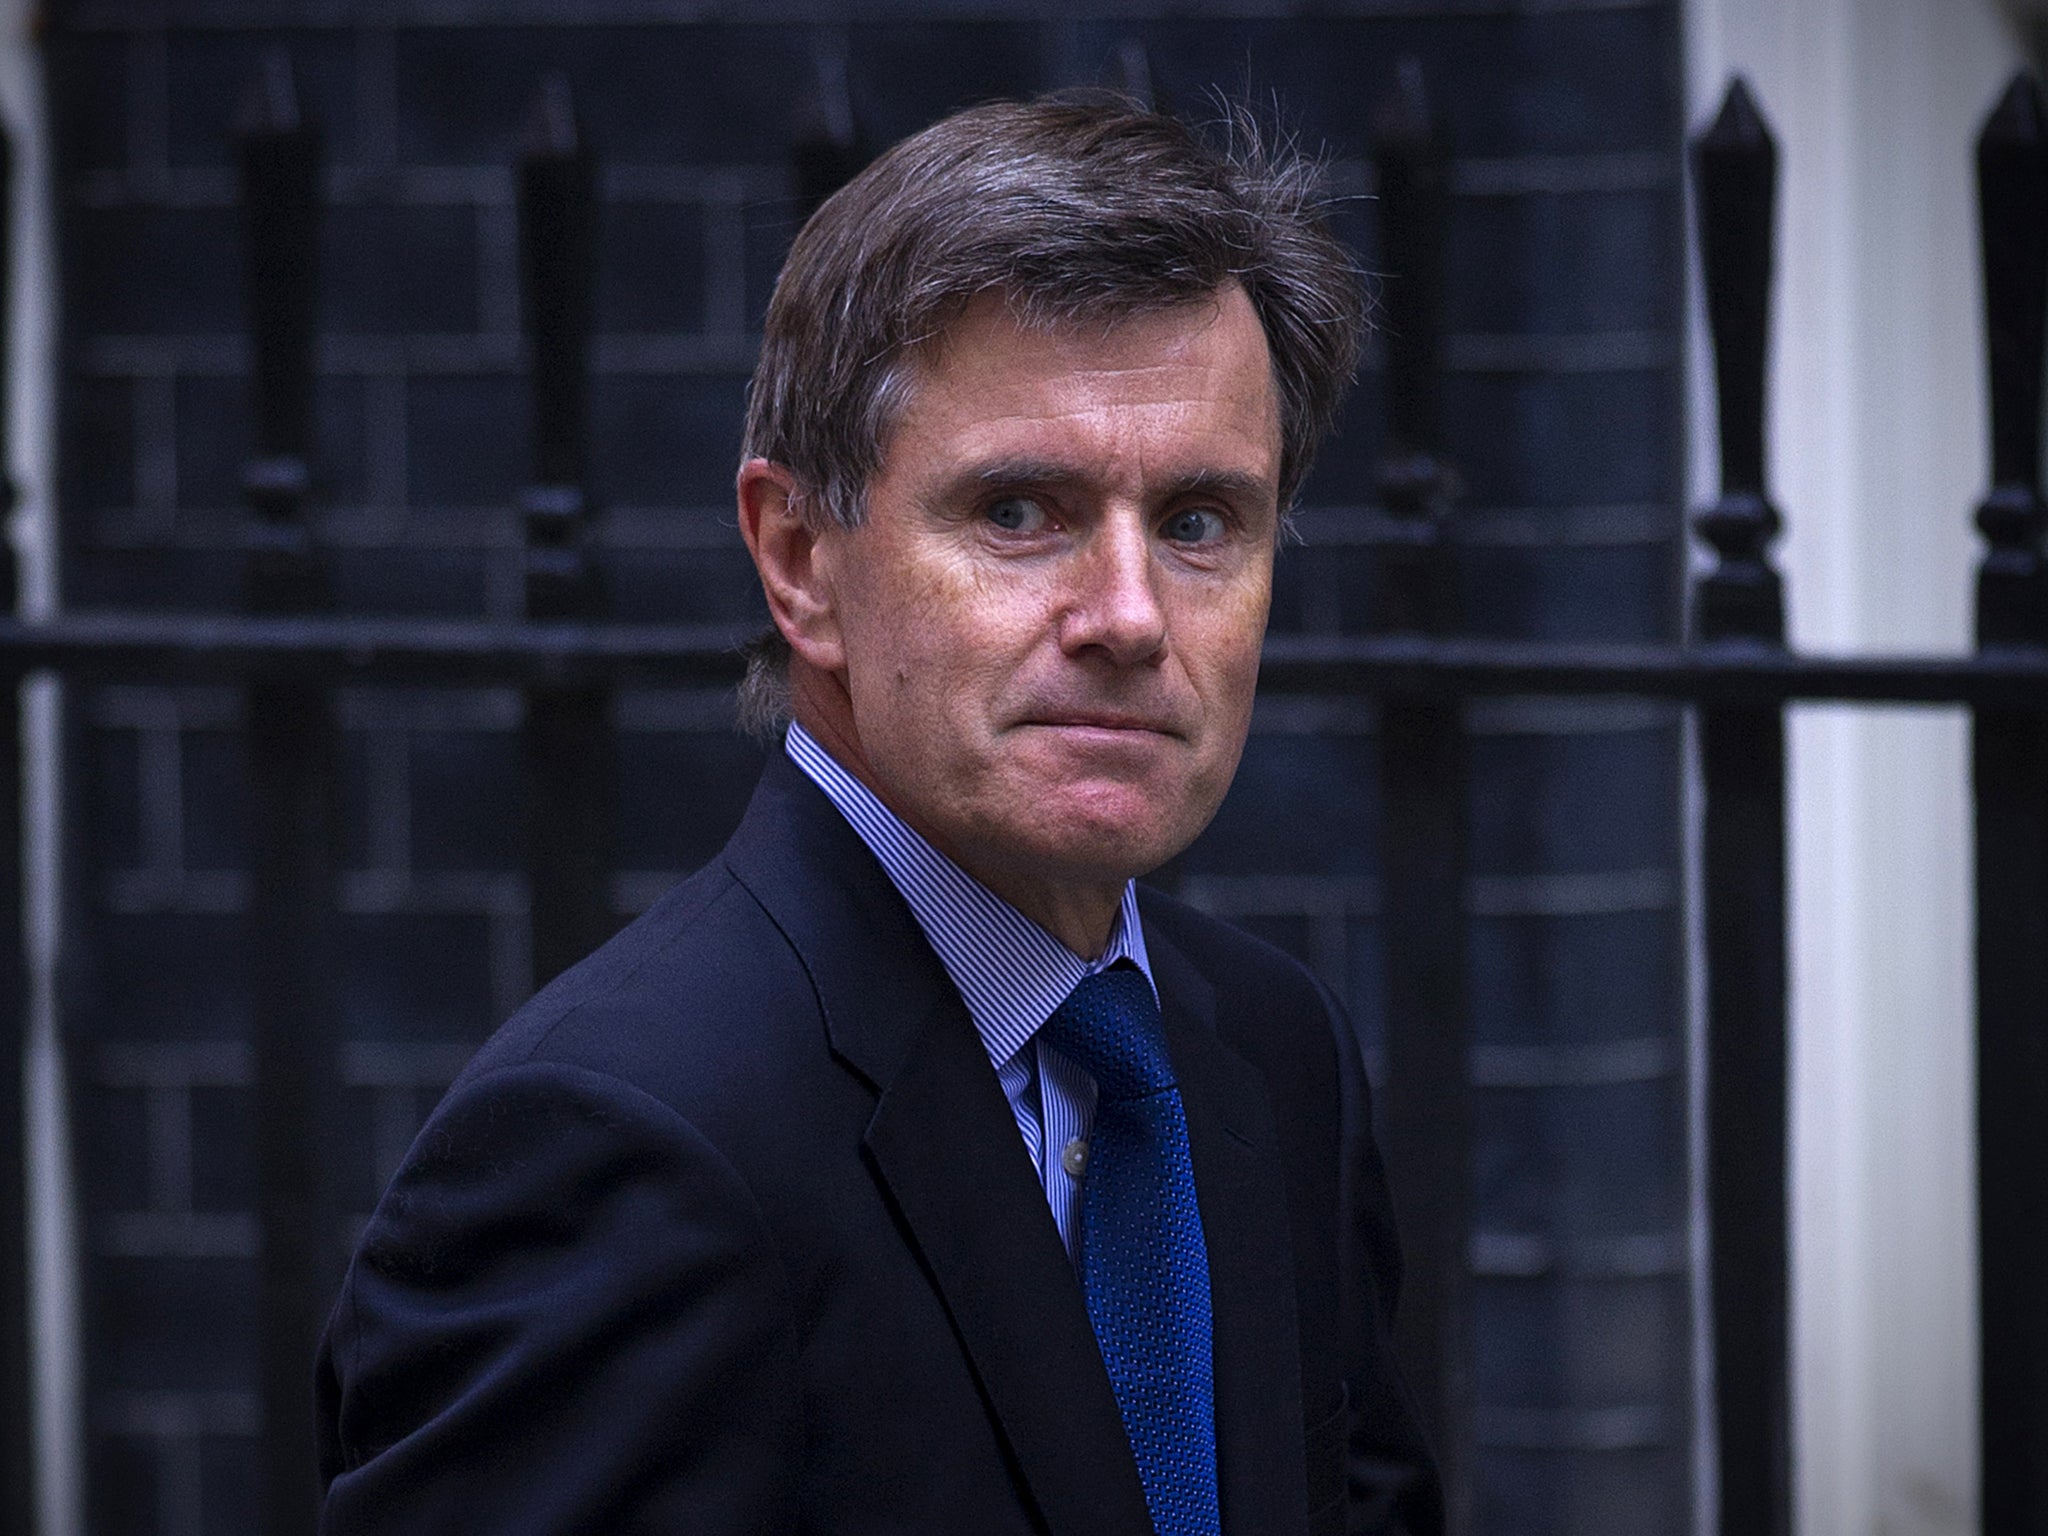 John Sawers was head of MI6 for five years before he stepped down in November